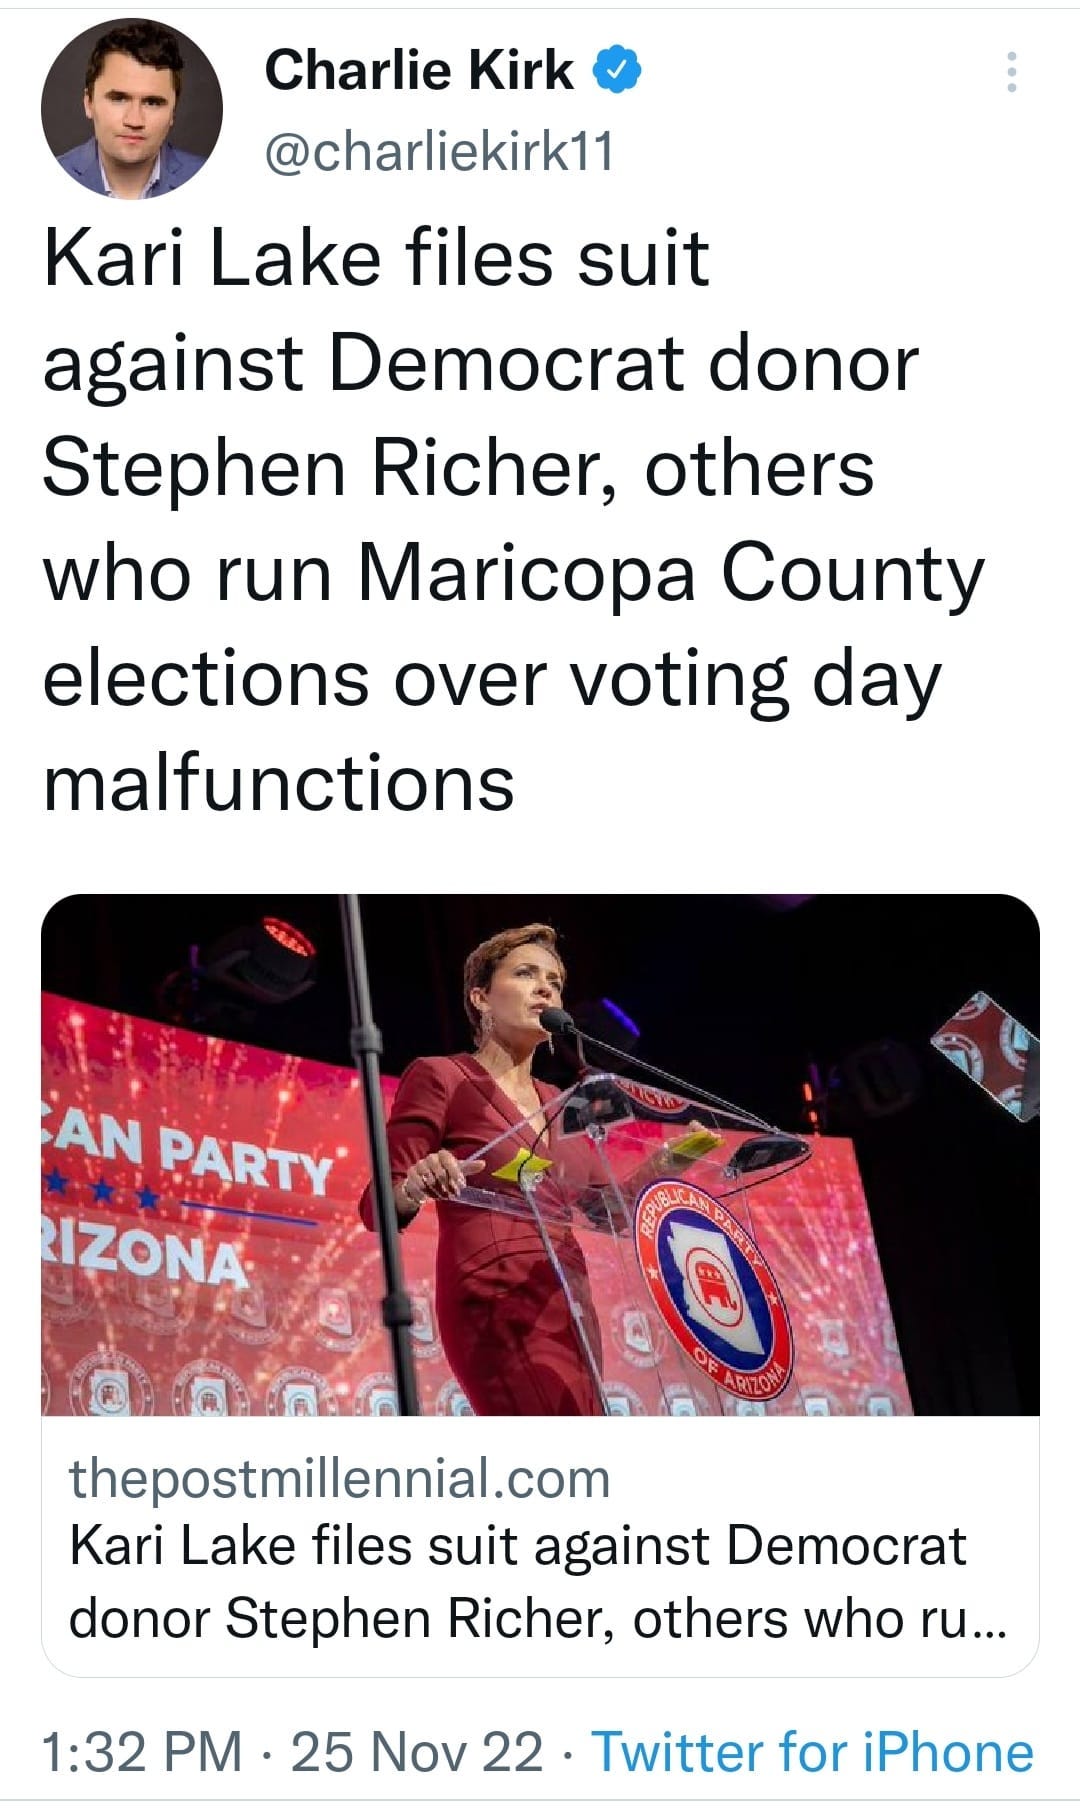 May be an image of 2 people and text that says 'Charlie Kirk @charliekirk11 Kari Lake files suit against Democrat donor Stephen Richer, others who run Maricopa County elections over voting day malfunctions AN PARTY RIZONA thepostmillennial.com Kari Lake files suit against Democrat donor Stephen Richer, others who ru... 1:32 PM 25 Nov 22 Twitter for iPhone'